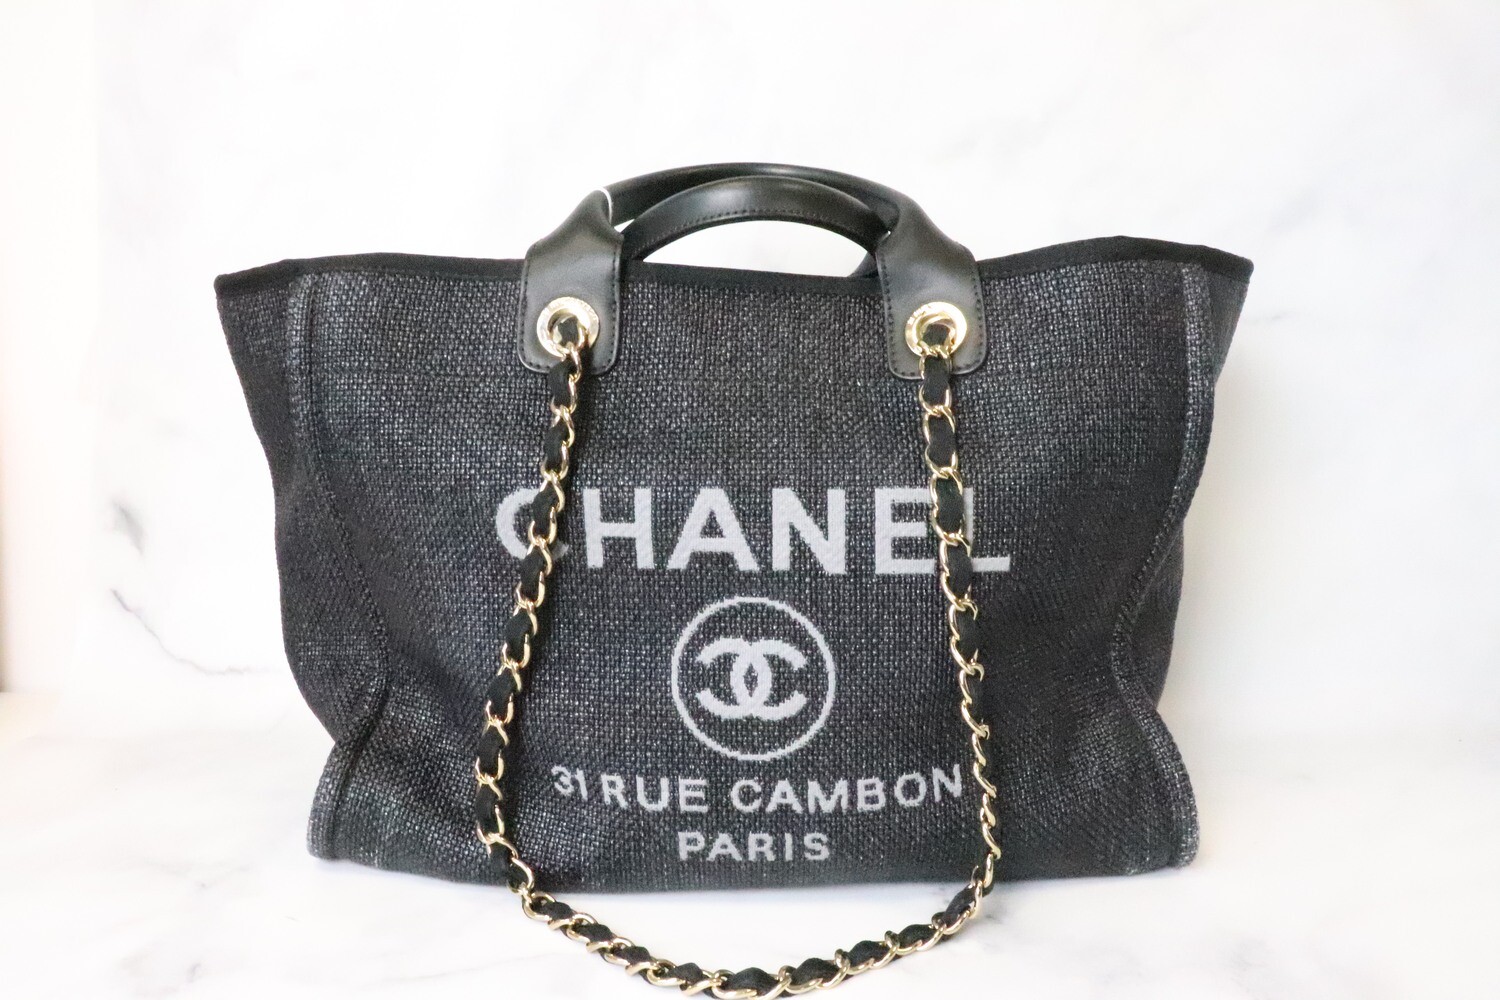 Chanel Deauville Large, Navy Raffia, Preowned in Dustbag